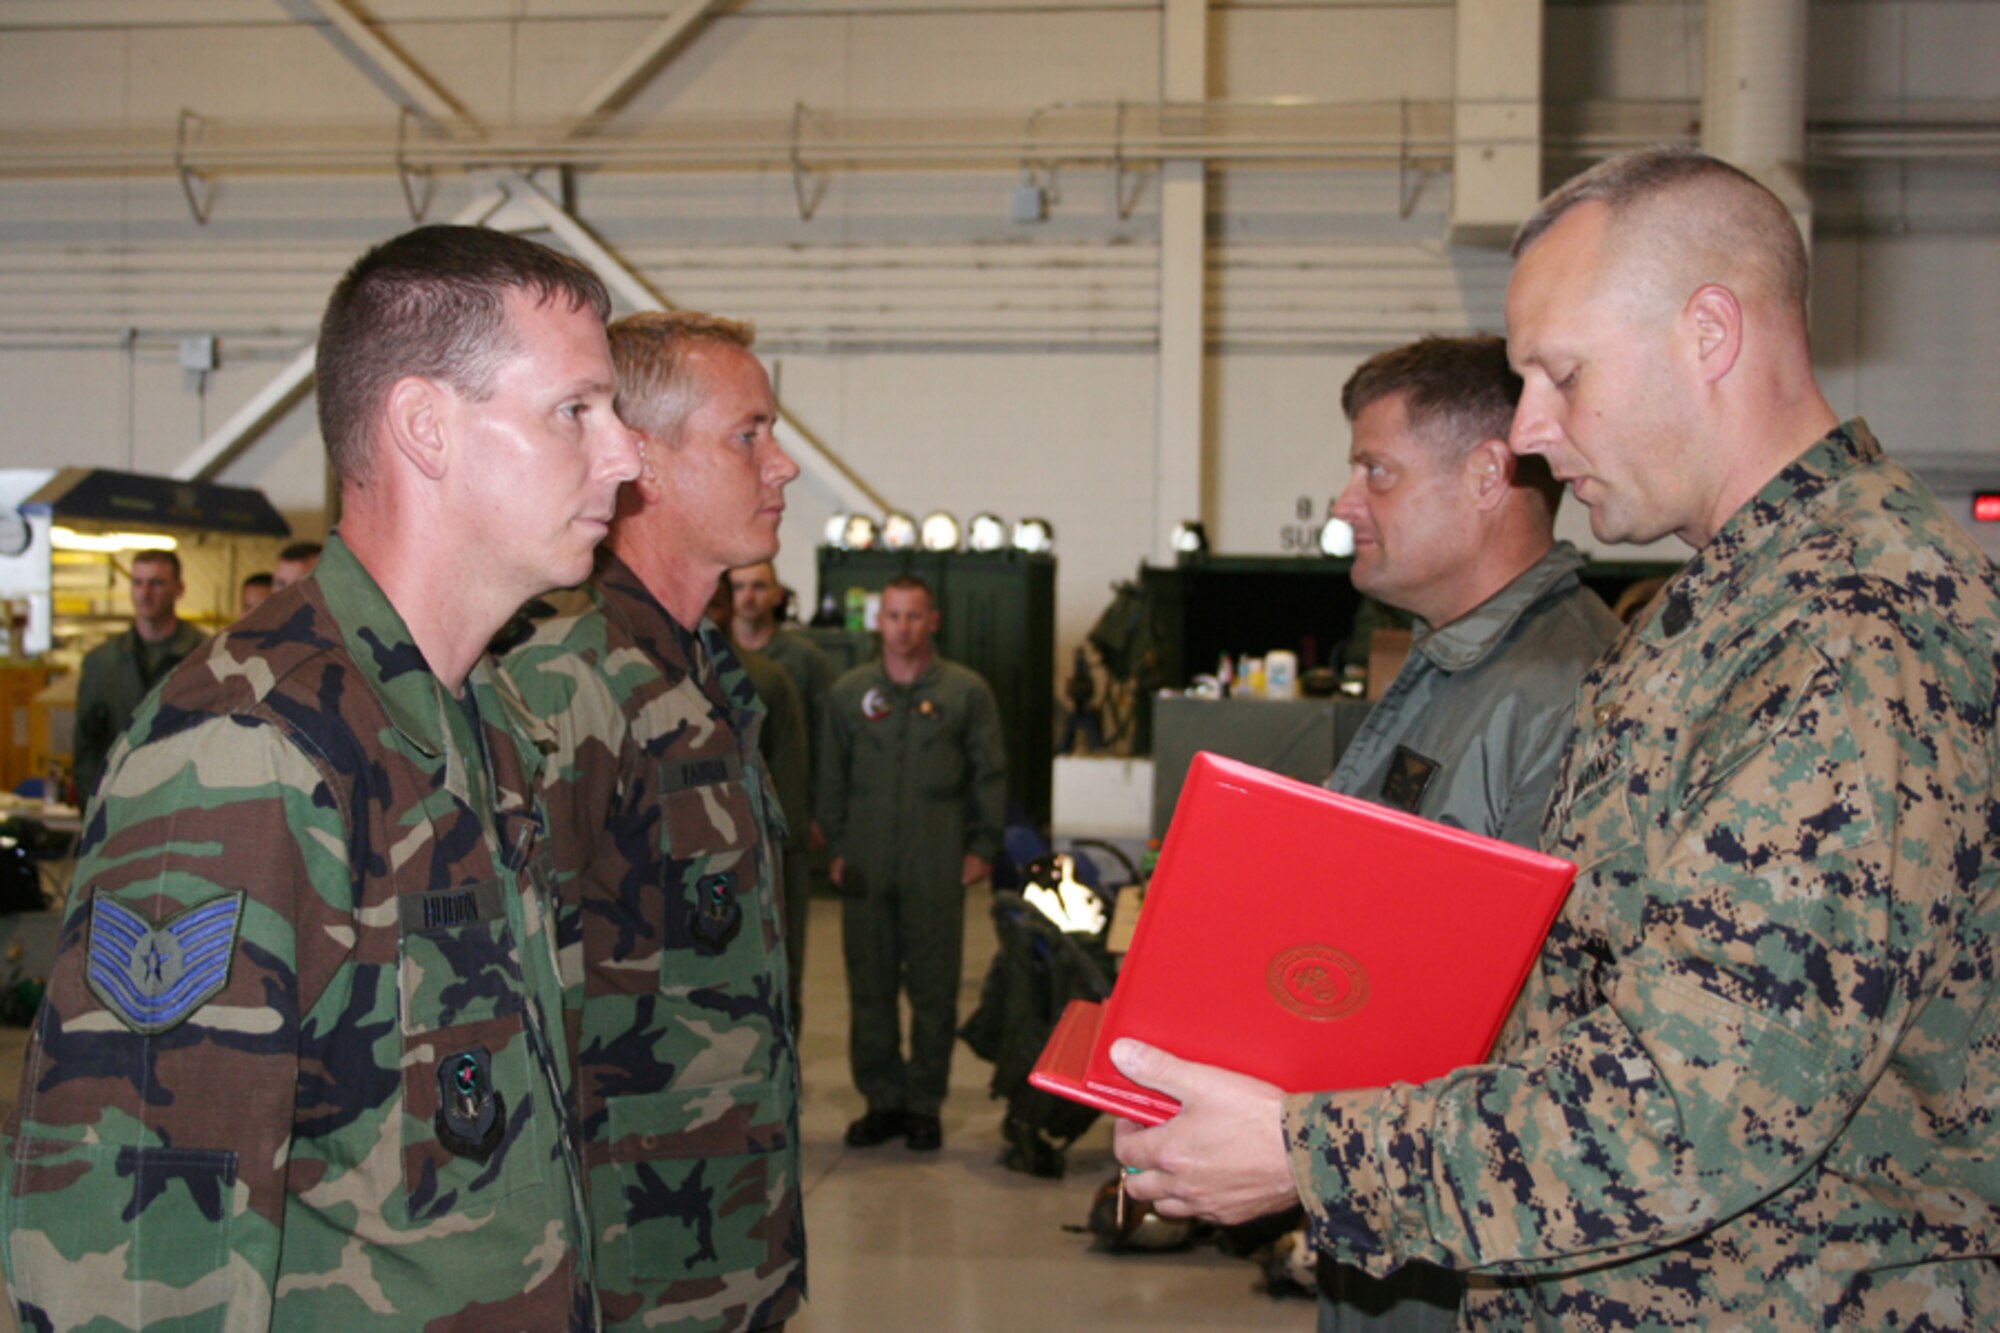 Tech. Sgt. Dennis Hudon (front left) and Master Sgt. James Vaughan, 8th Aircraft Maintenance Unit, stand at attention while Marine Sergeant Major Stephen Balczo (front right), Marine Medium Tiltrotor Training Squadron 204, reads the Navy and Marine Corps Achievement Medal citations, and Marine Col. Mark Clark, VMMT 204 commanding officer, waits to pin the medals on the Airmen. The Airmen were presented the medals in a surprise ceremony April 5 in Independence Hangar. (U.S. Air Force photo by Staff Sgt. Angela Shepherd)